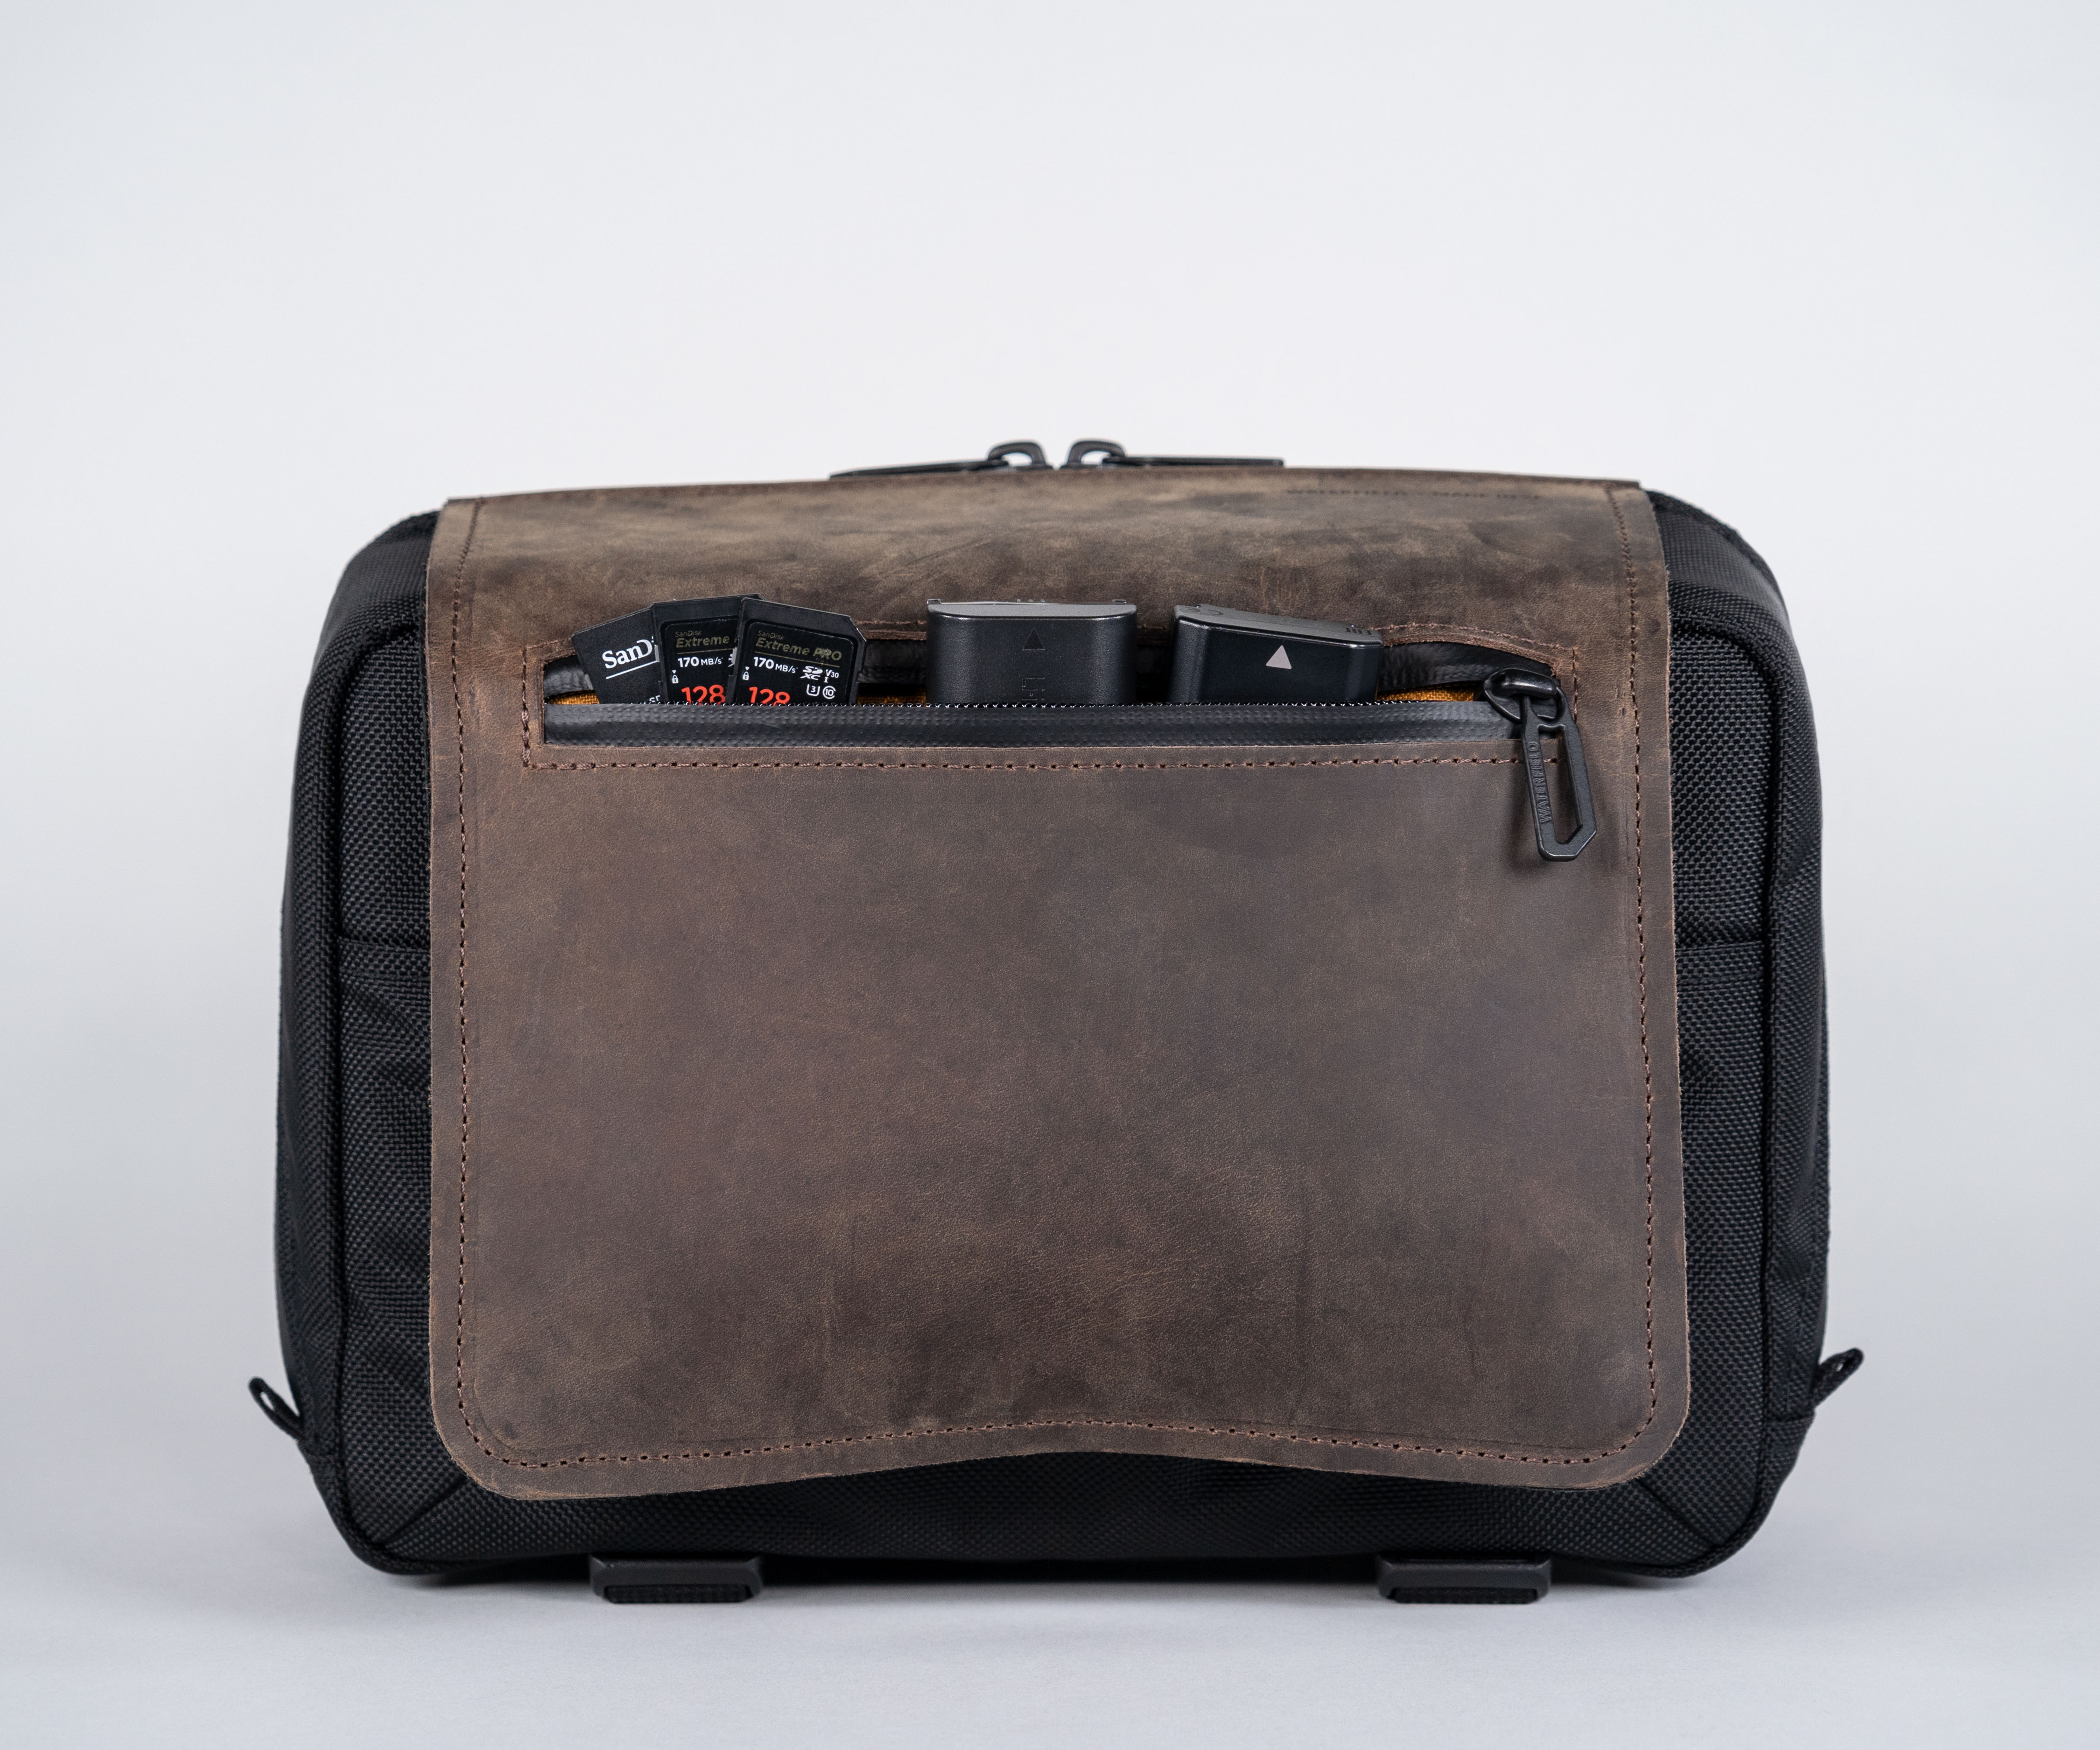 Pleated front pocket with interior organization keeps quick-access gear at hand